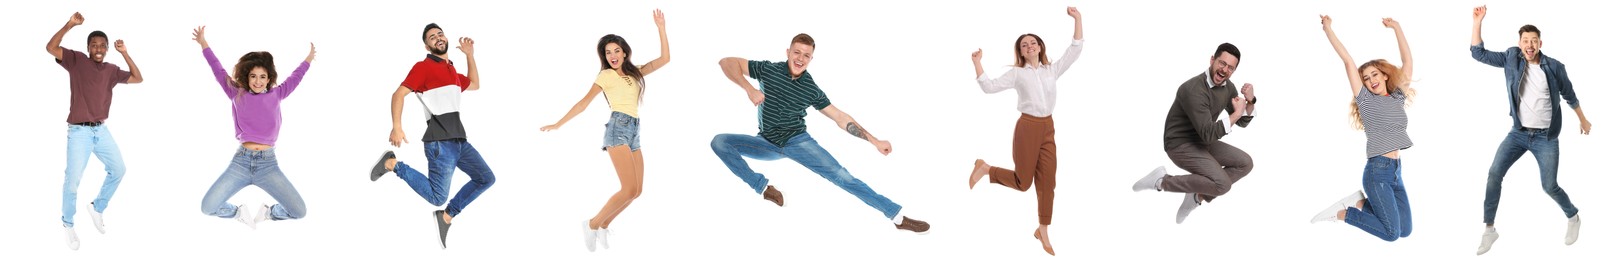 Image of People jumping on white background, collage with photos